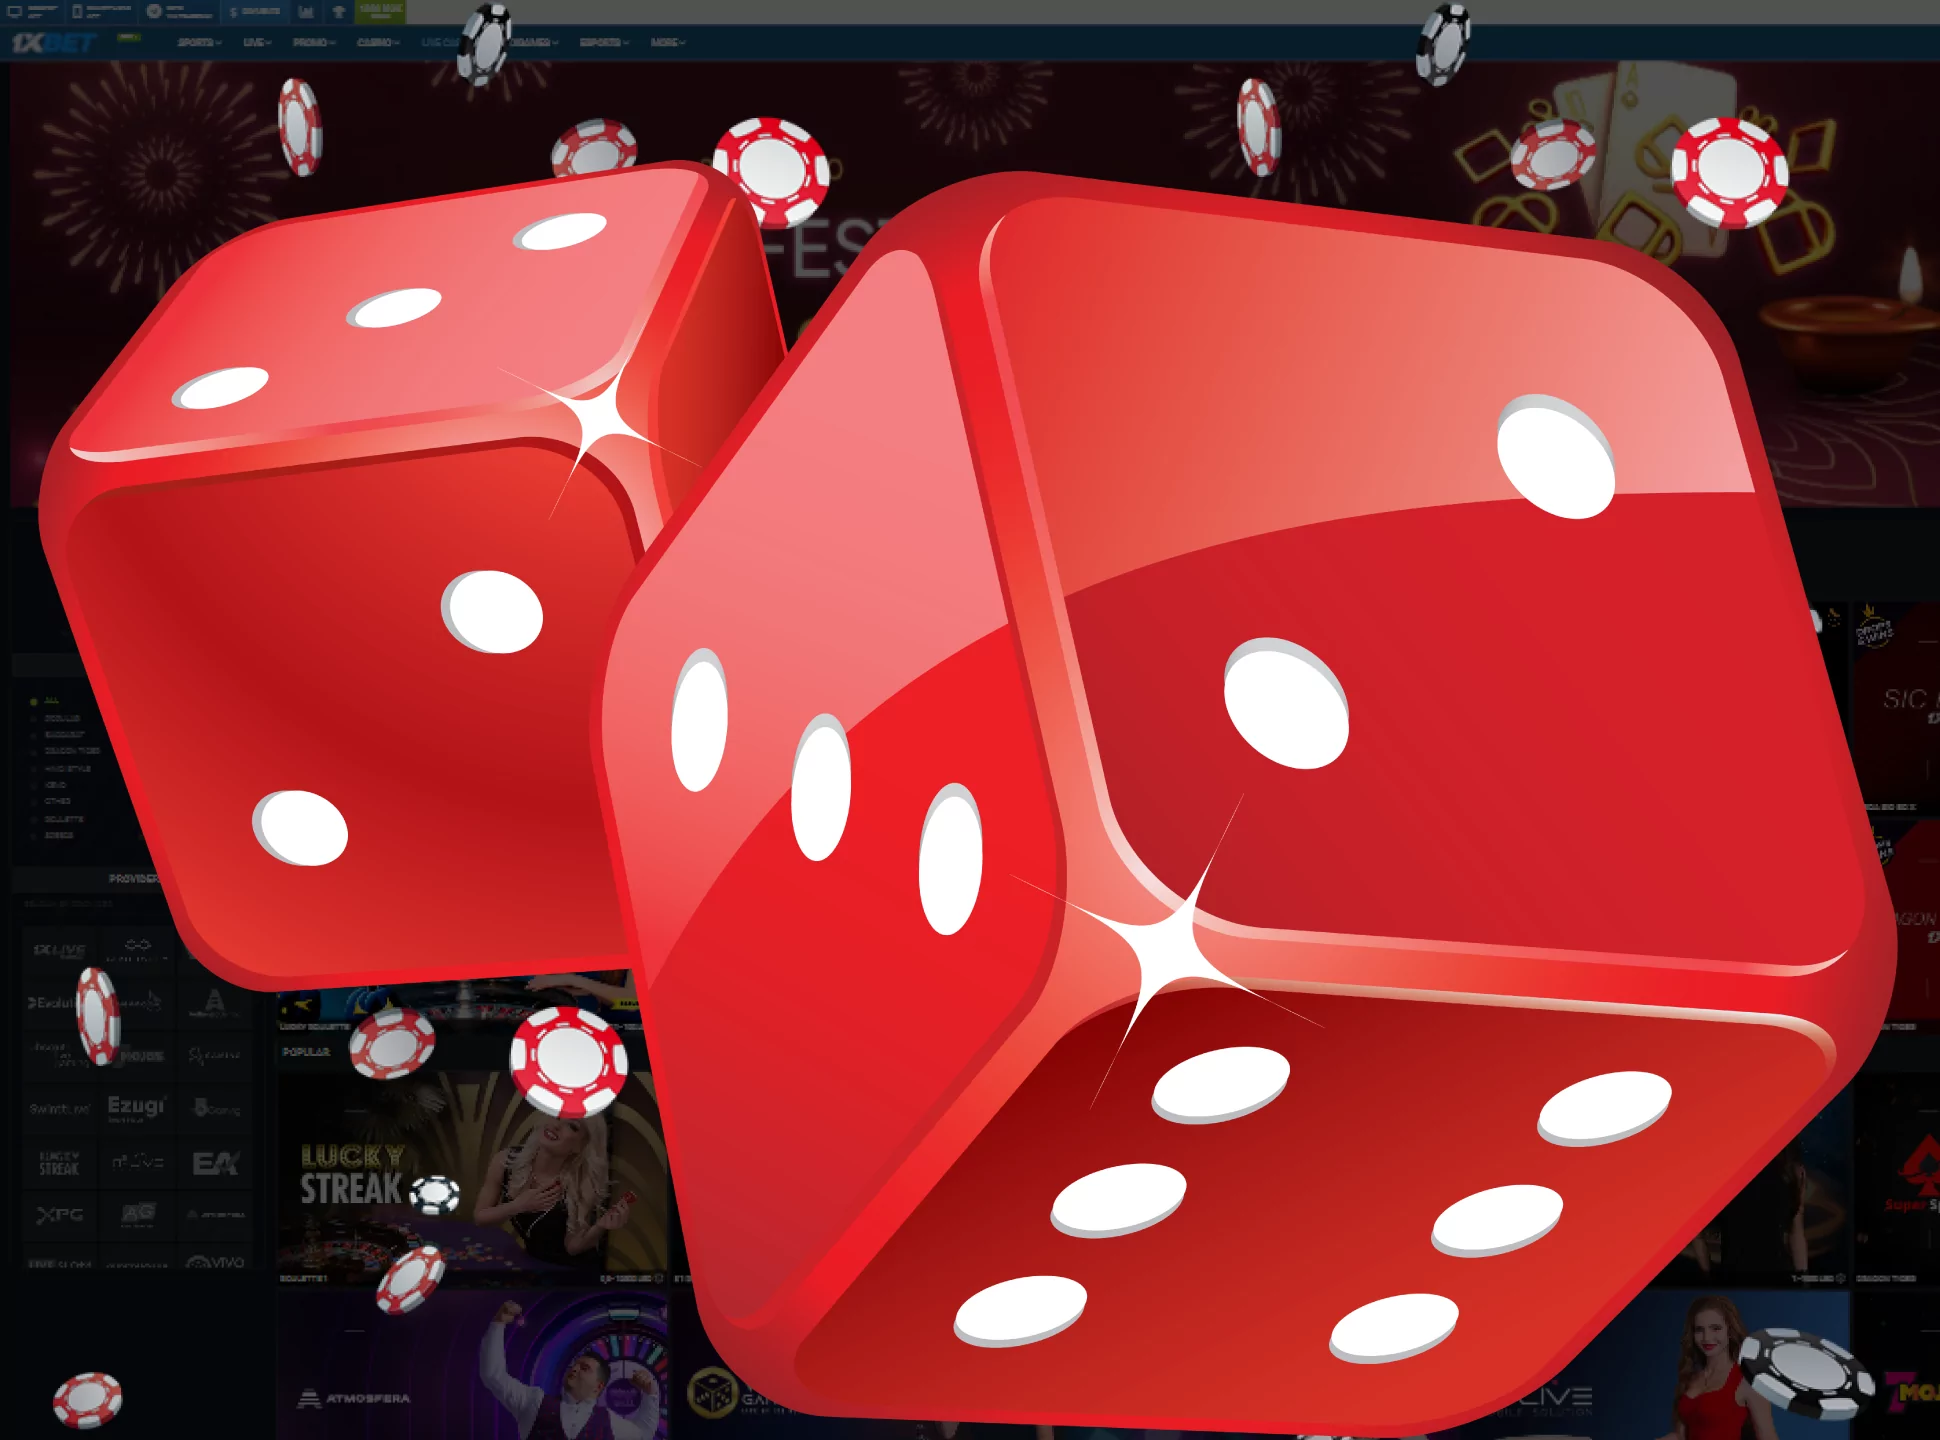 Roll the dices and win the live sic bo games.